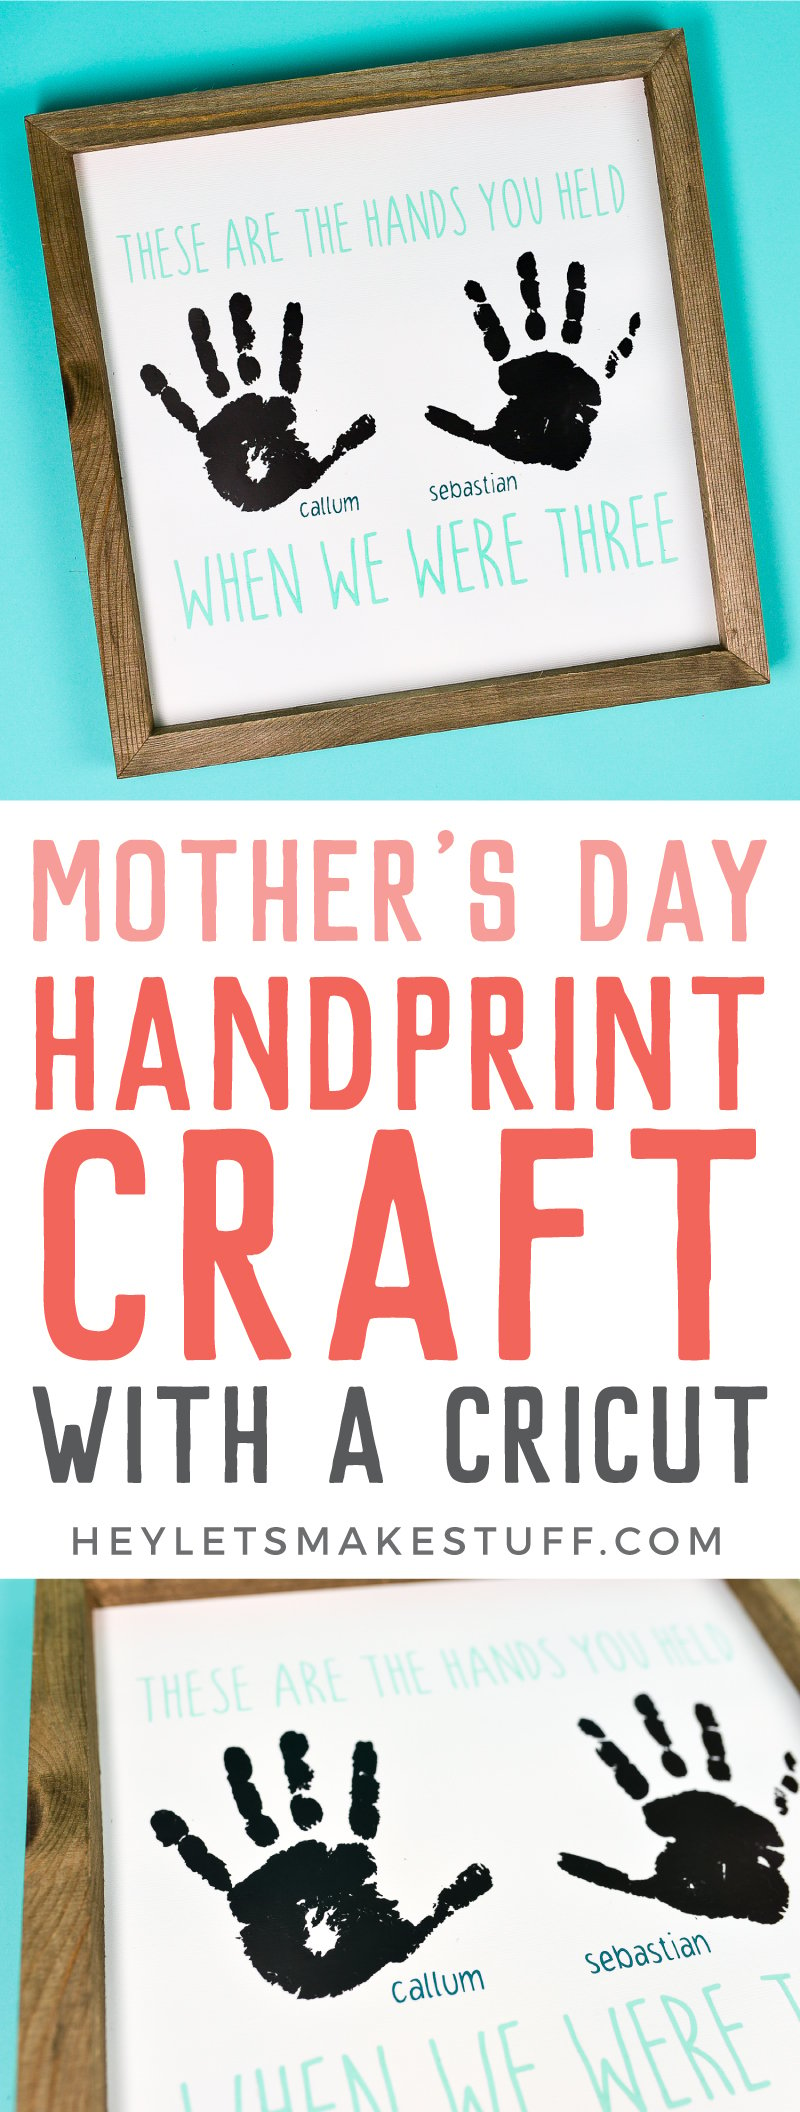 Pictures of framed handprints with advertising from HEYLETSMAKESTUFF.COM for Mother\'s Day Handprint Craft with a Cricut